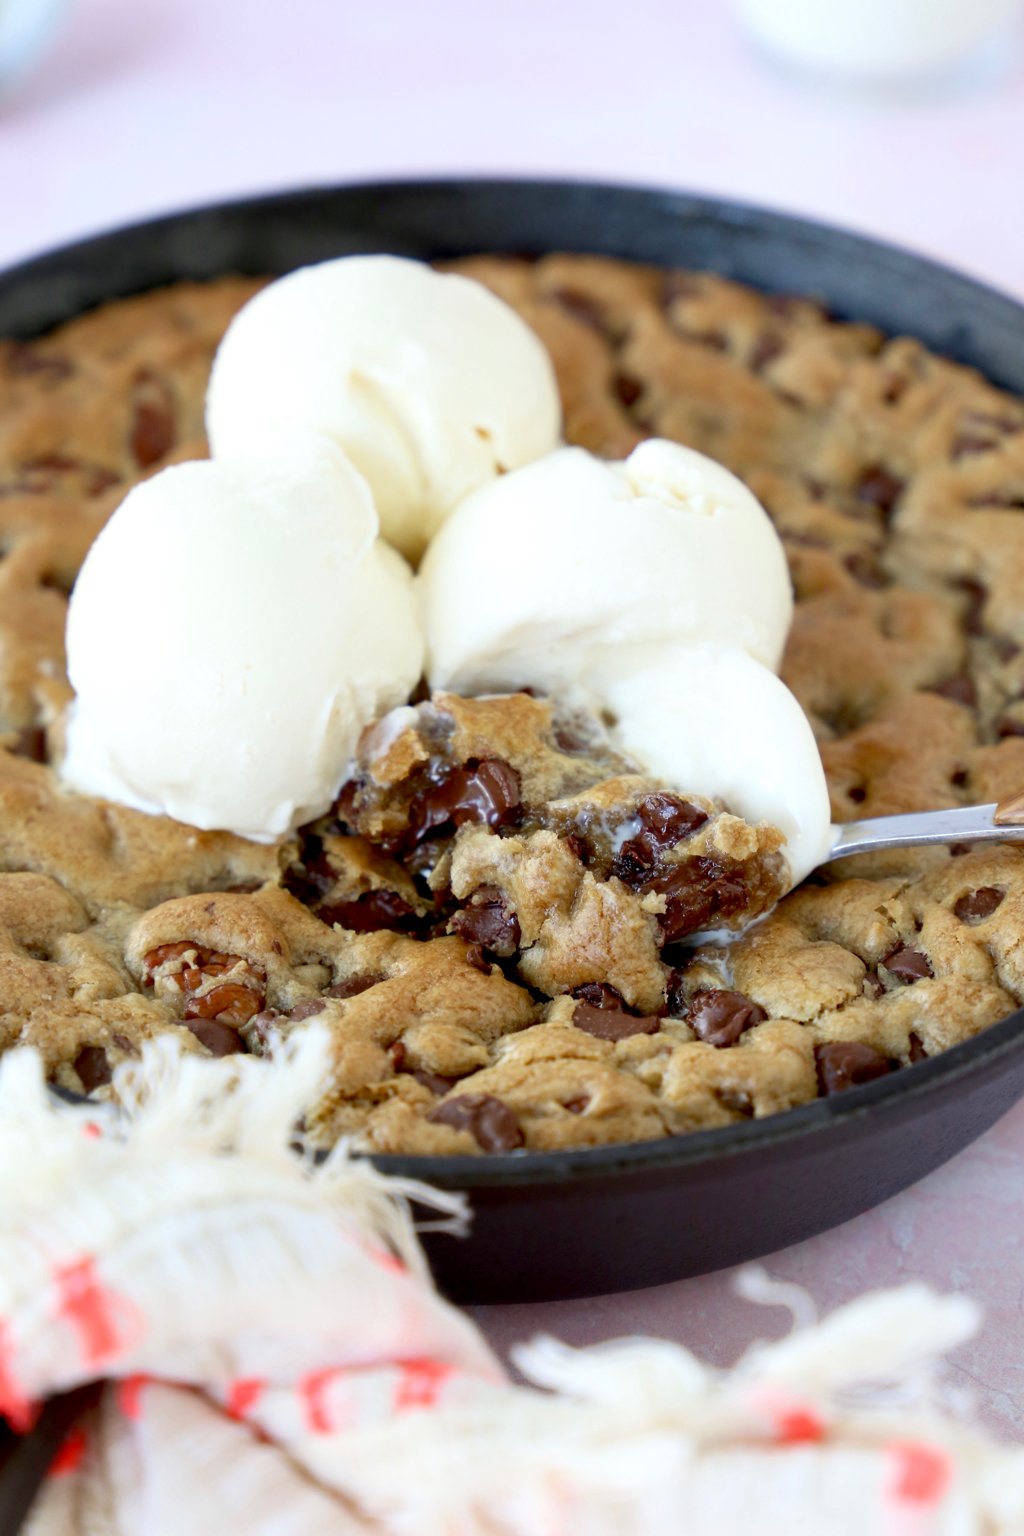 How To Make a Brown Butter Chocolate Chip Skillet Cookie - Chef Savvy